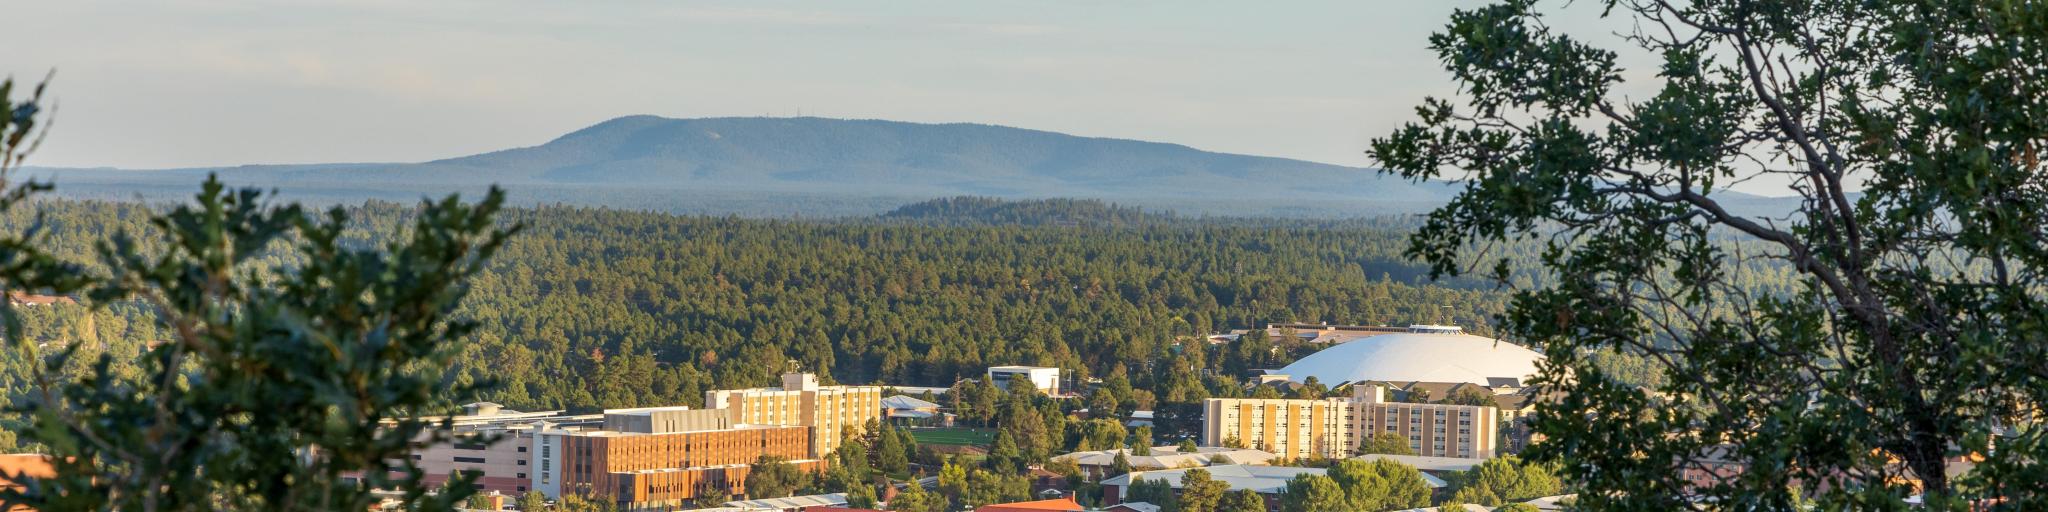 Aerial view over Flagstaff, Arizona, framed with forests and mountains in the distance